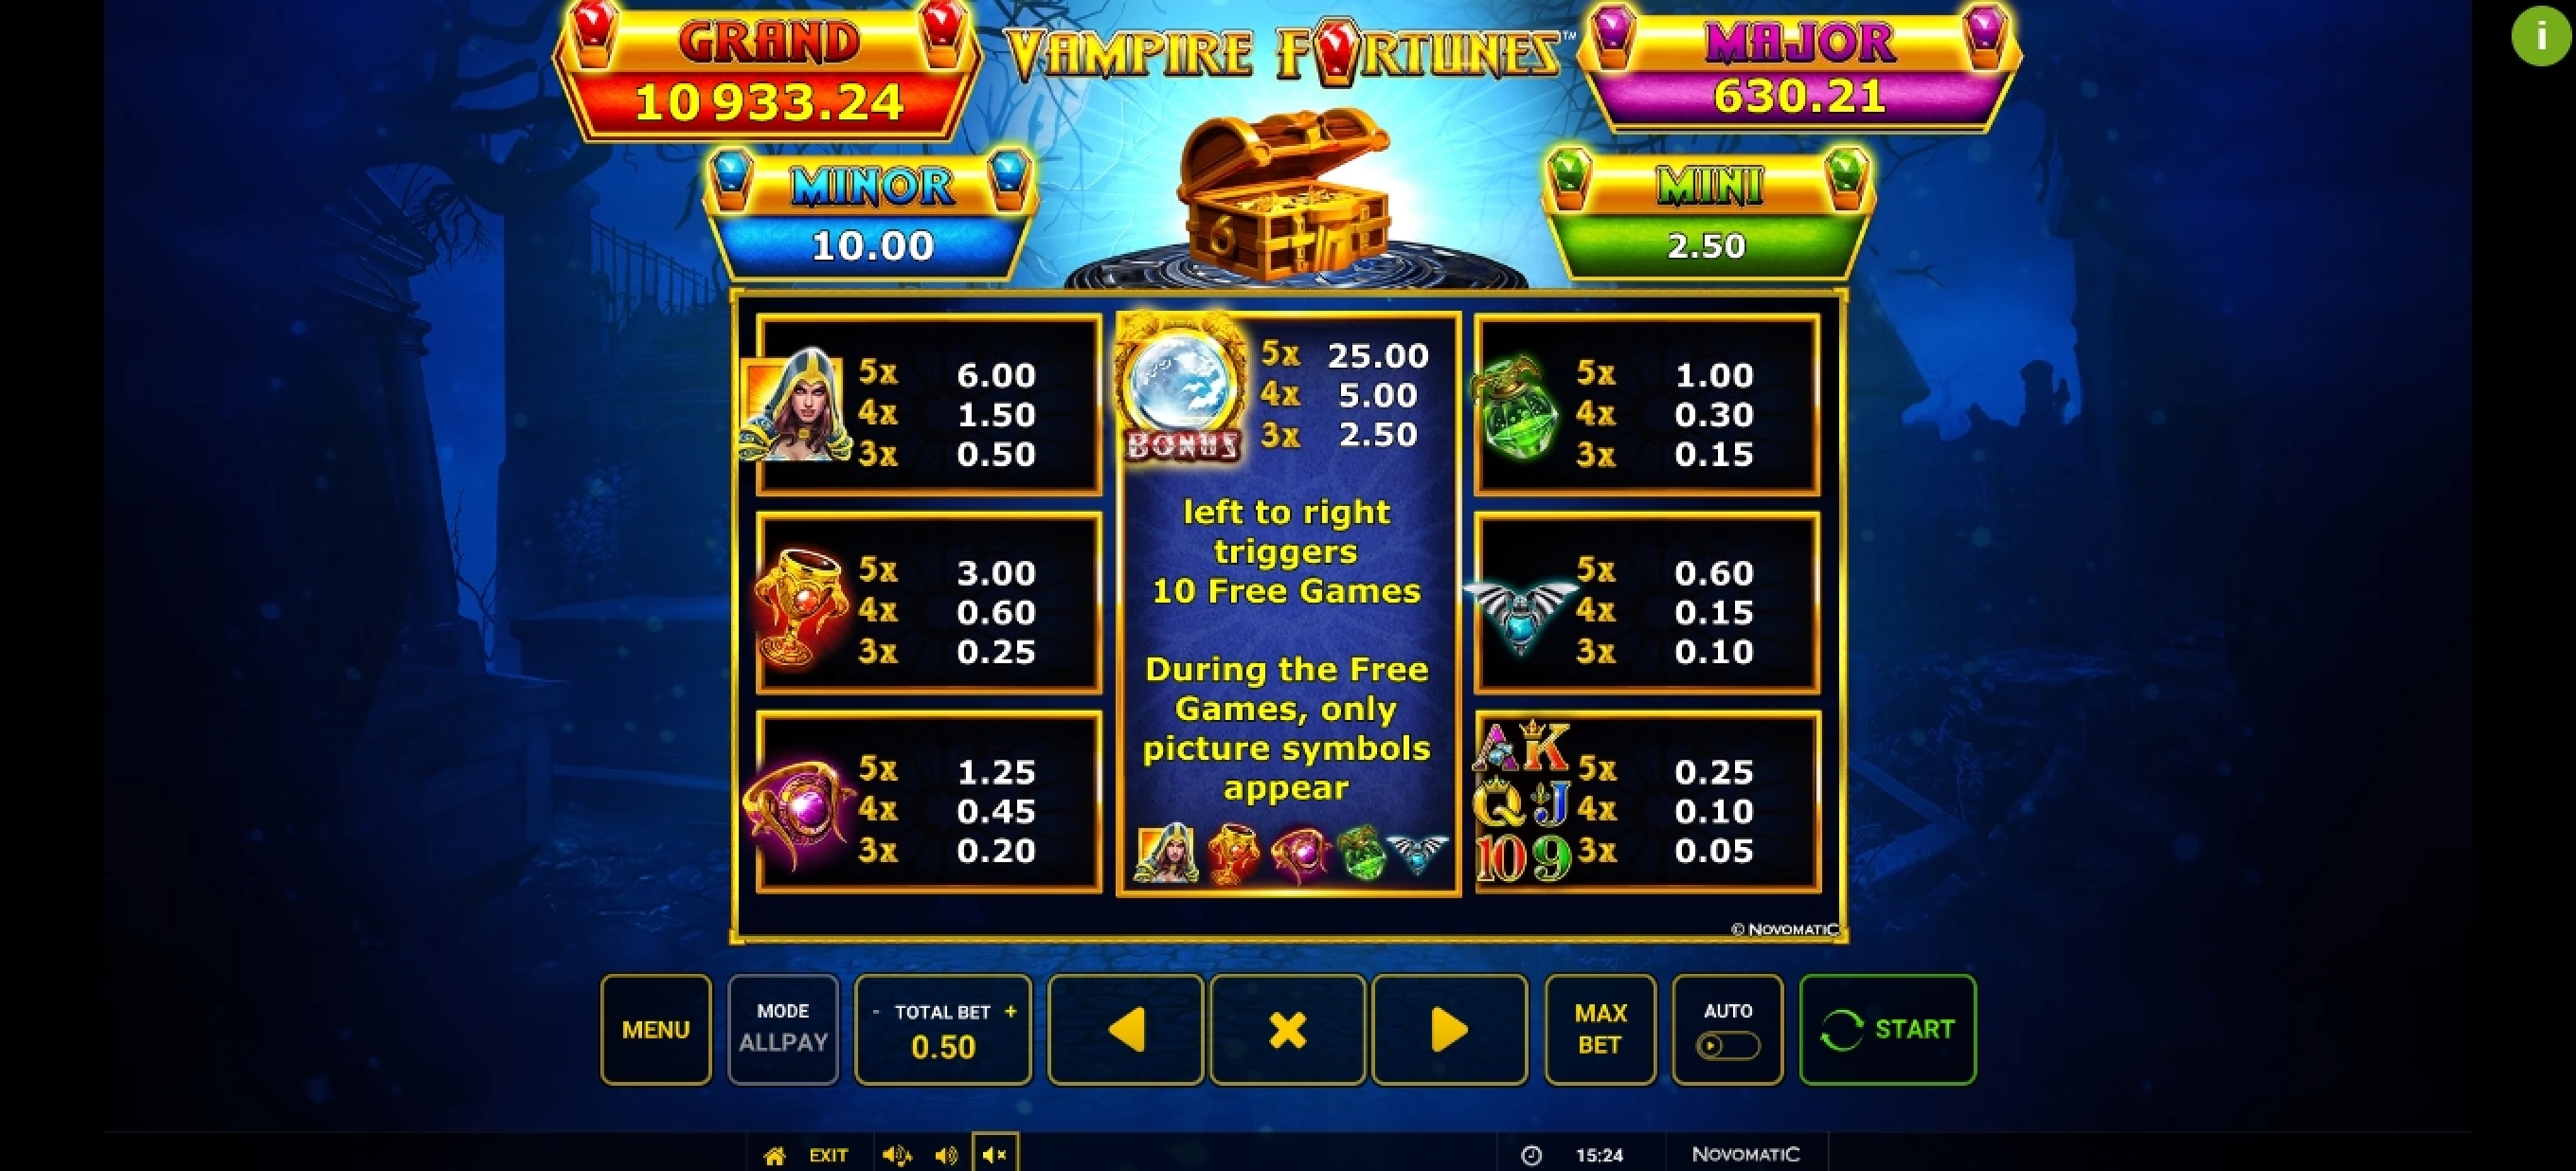 Info of Vampire Fortunes Slot Game by Greentube